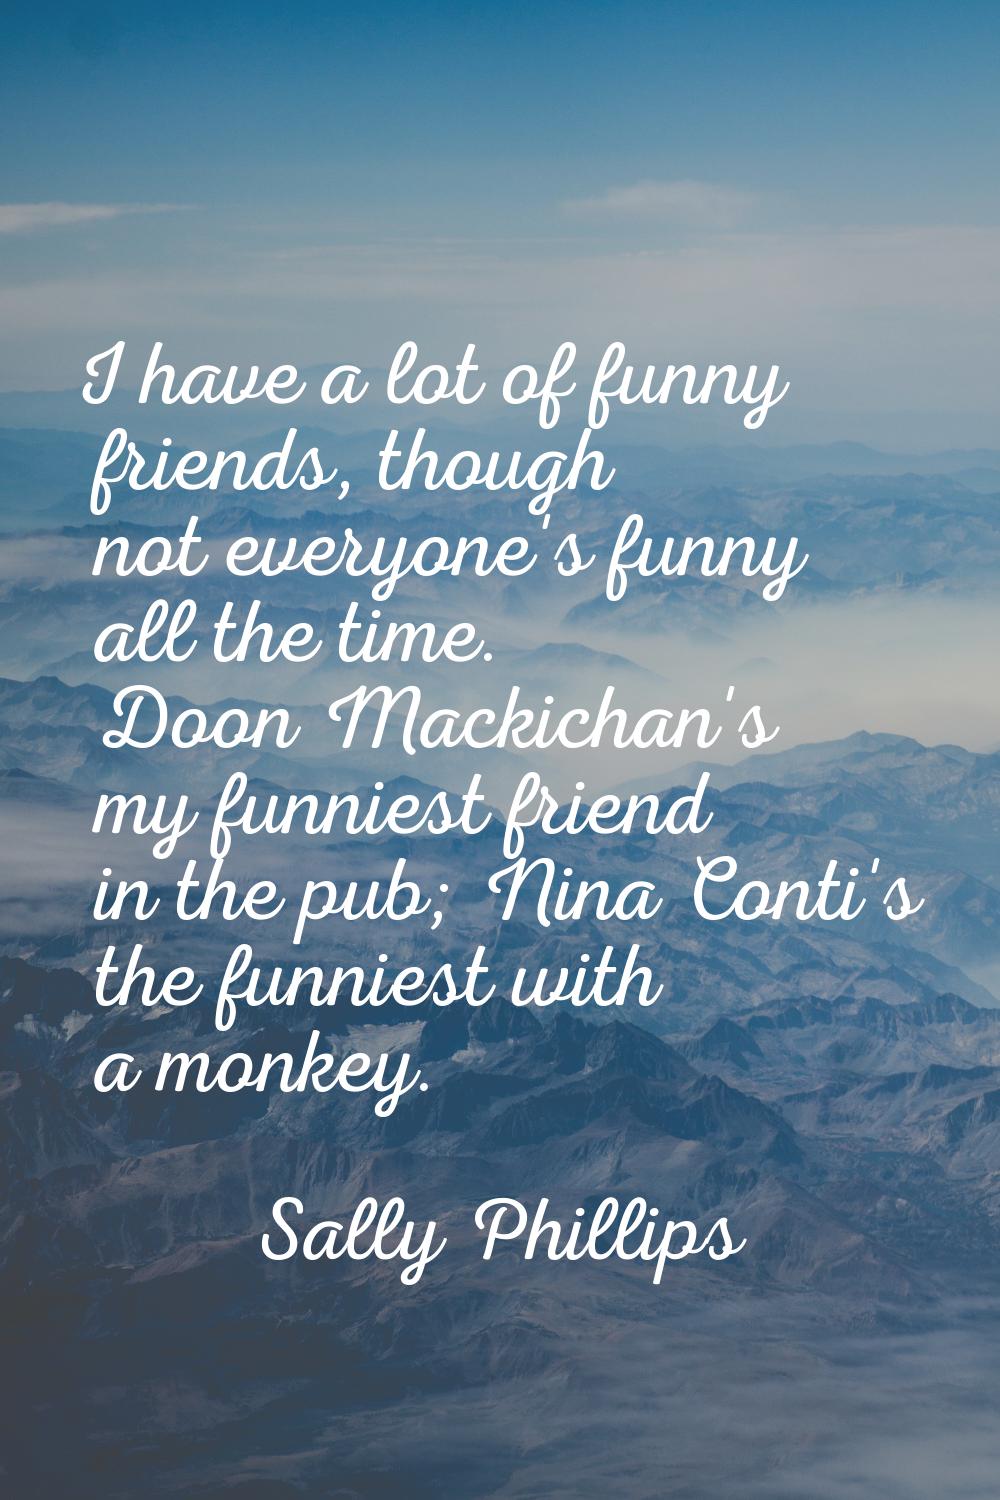 I have a lot of funny friends, though not everyone's funny all the time. Doon Mackichan's my funnie